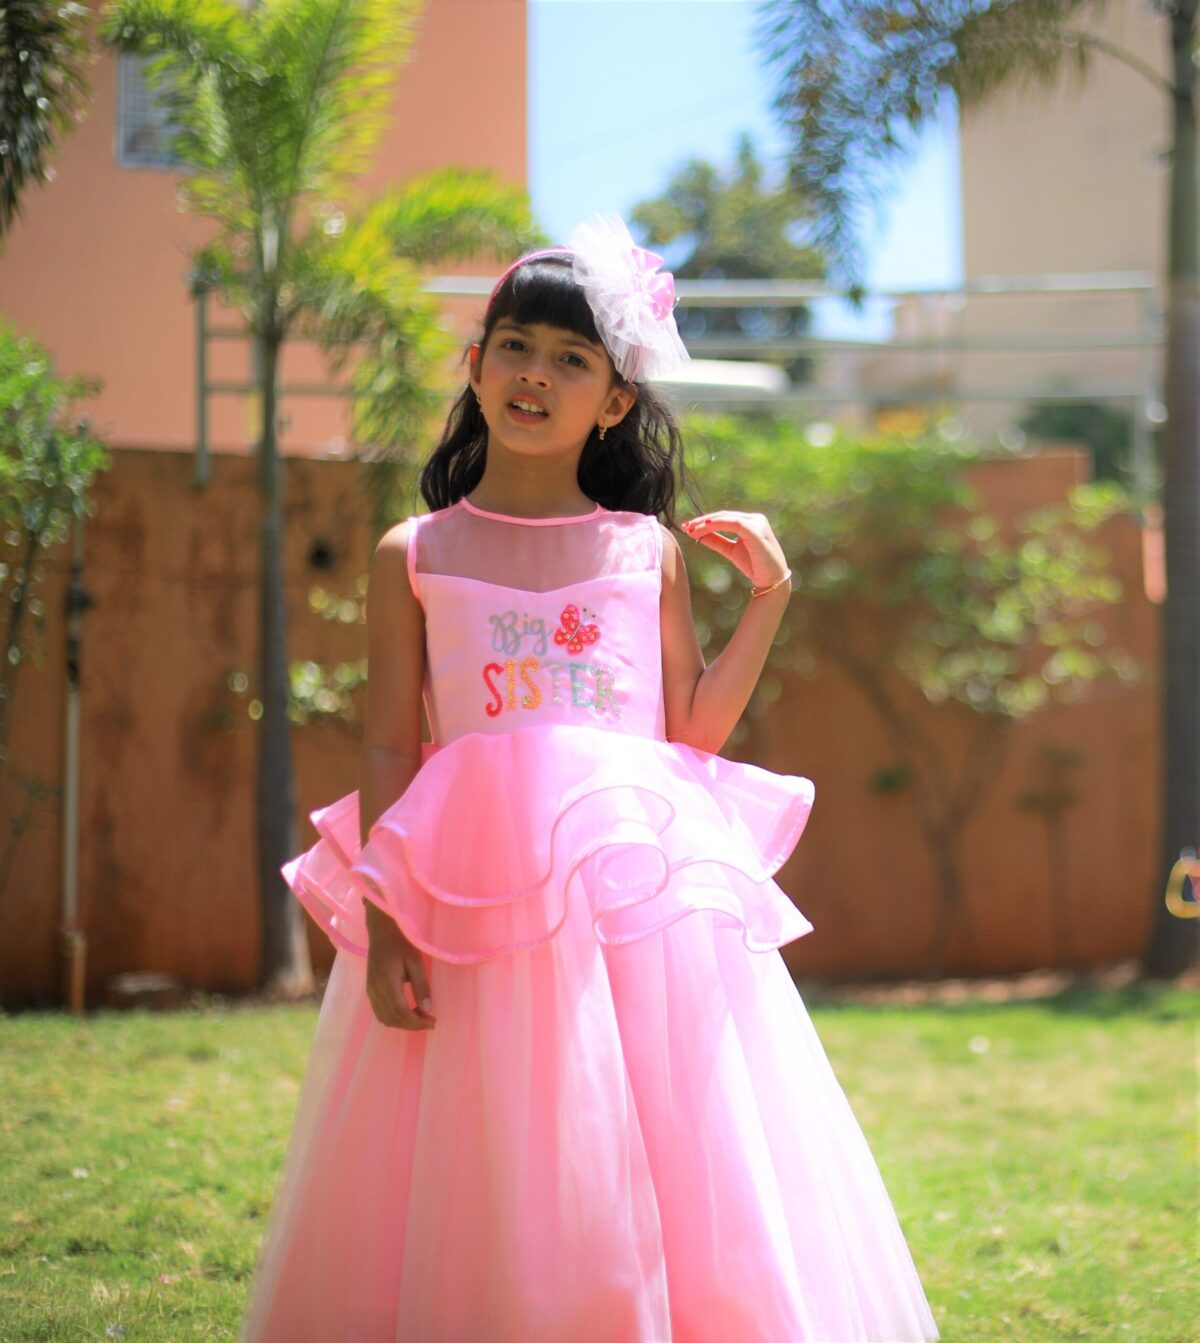 1M7A9505 1 scaled Big Sister Ruffle Gown - Pink